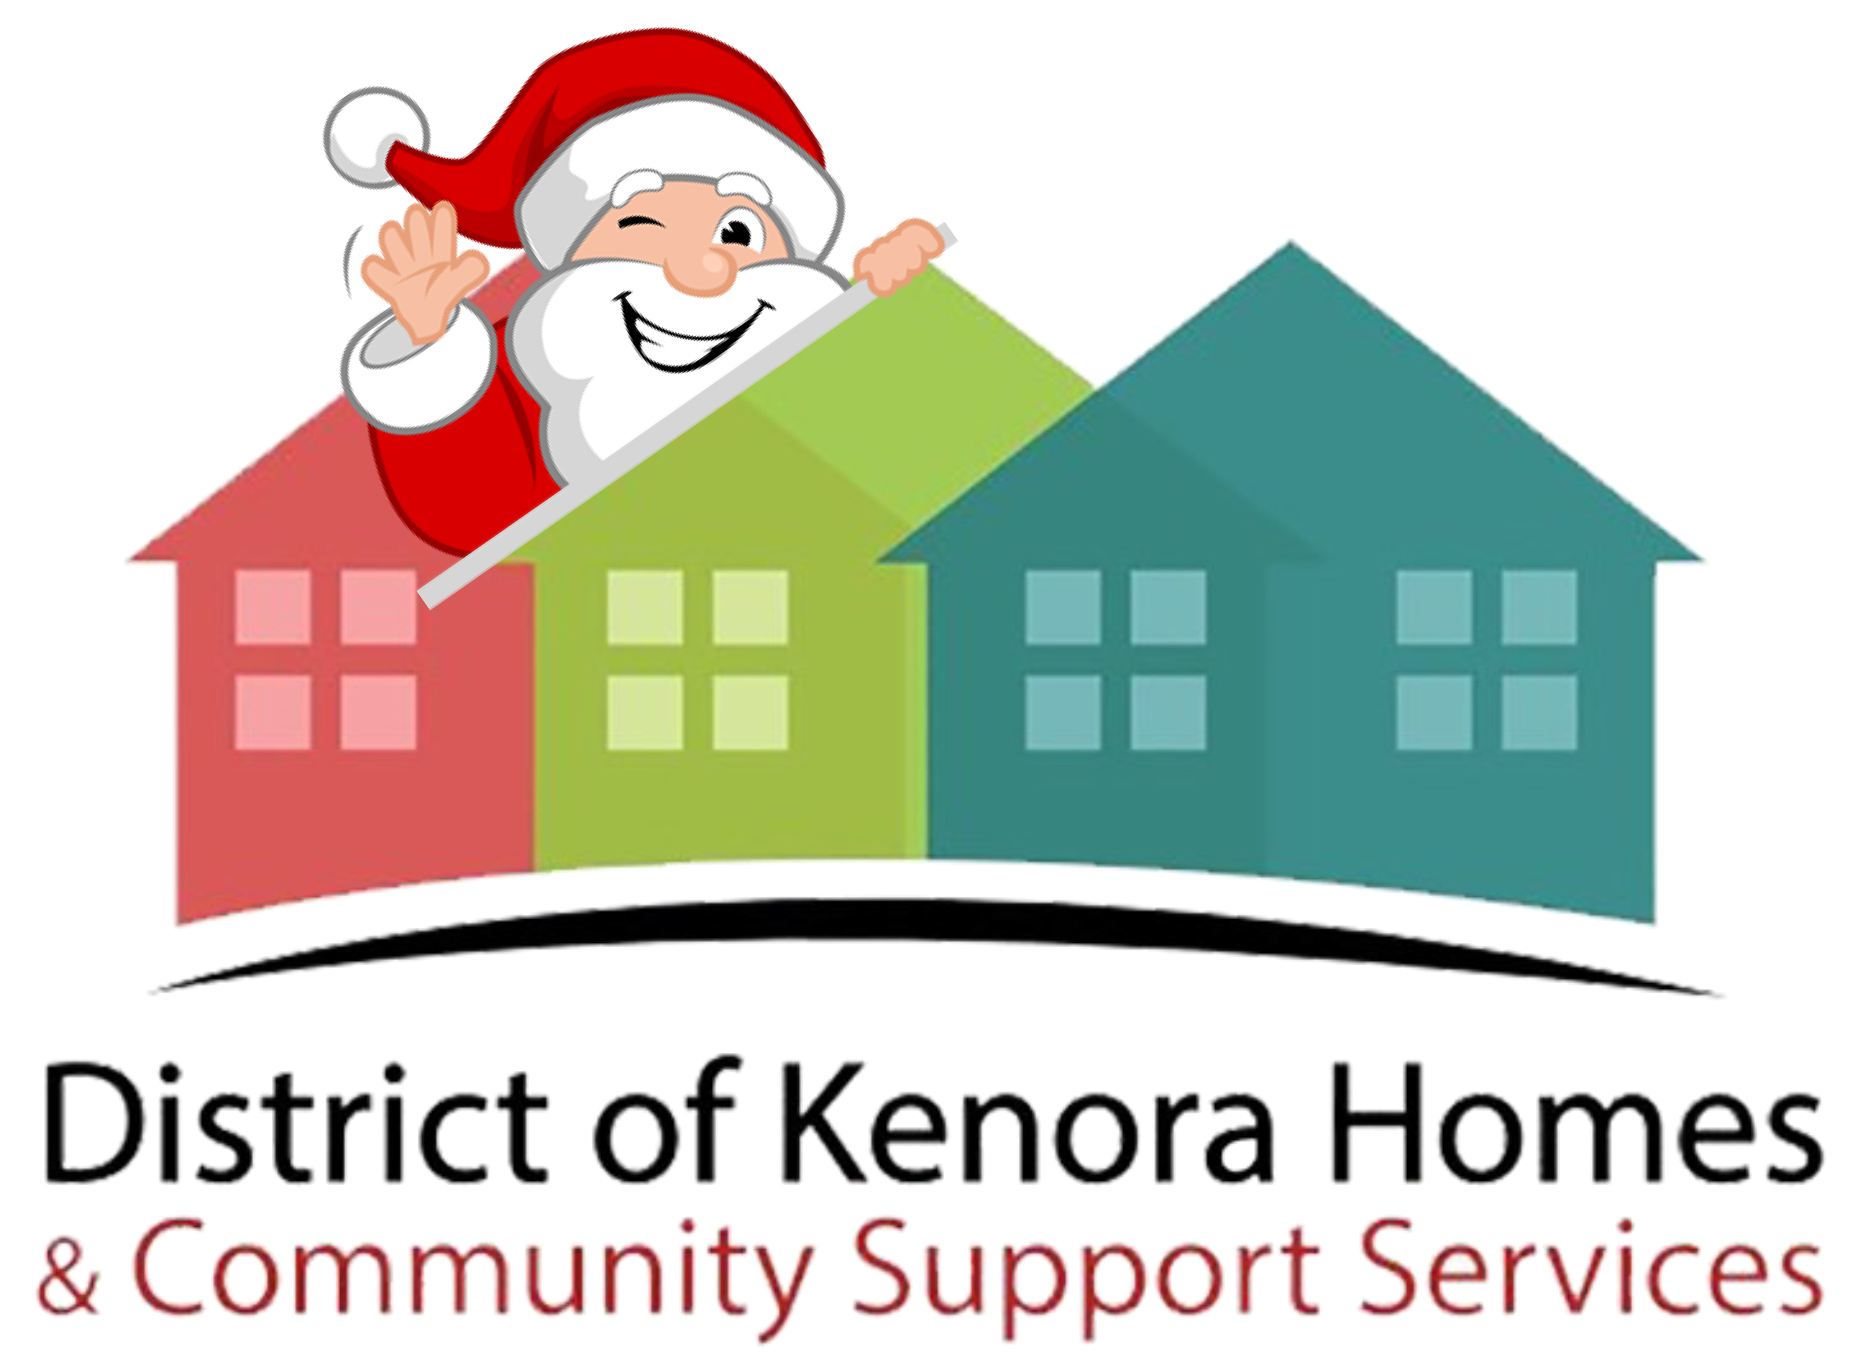 DISTRICT OF KENORA HOMES & COMMUNITY SUPPORT SERVICES logo